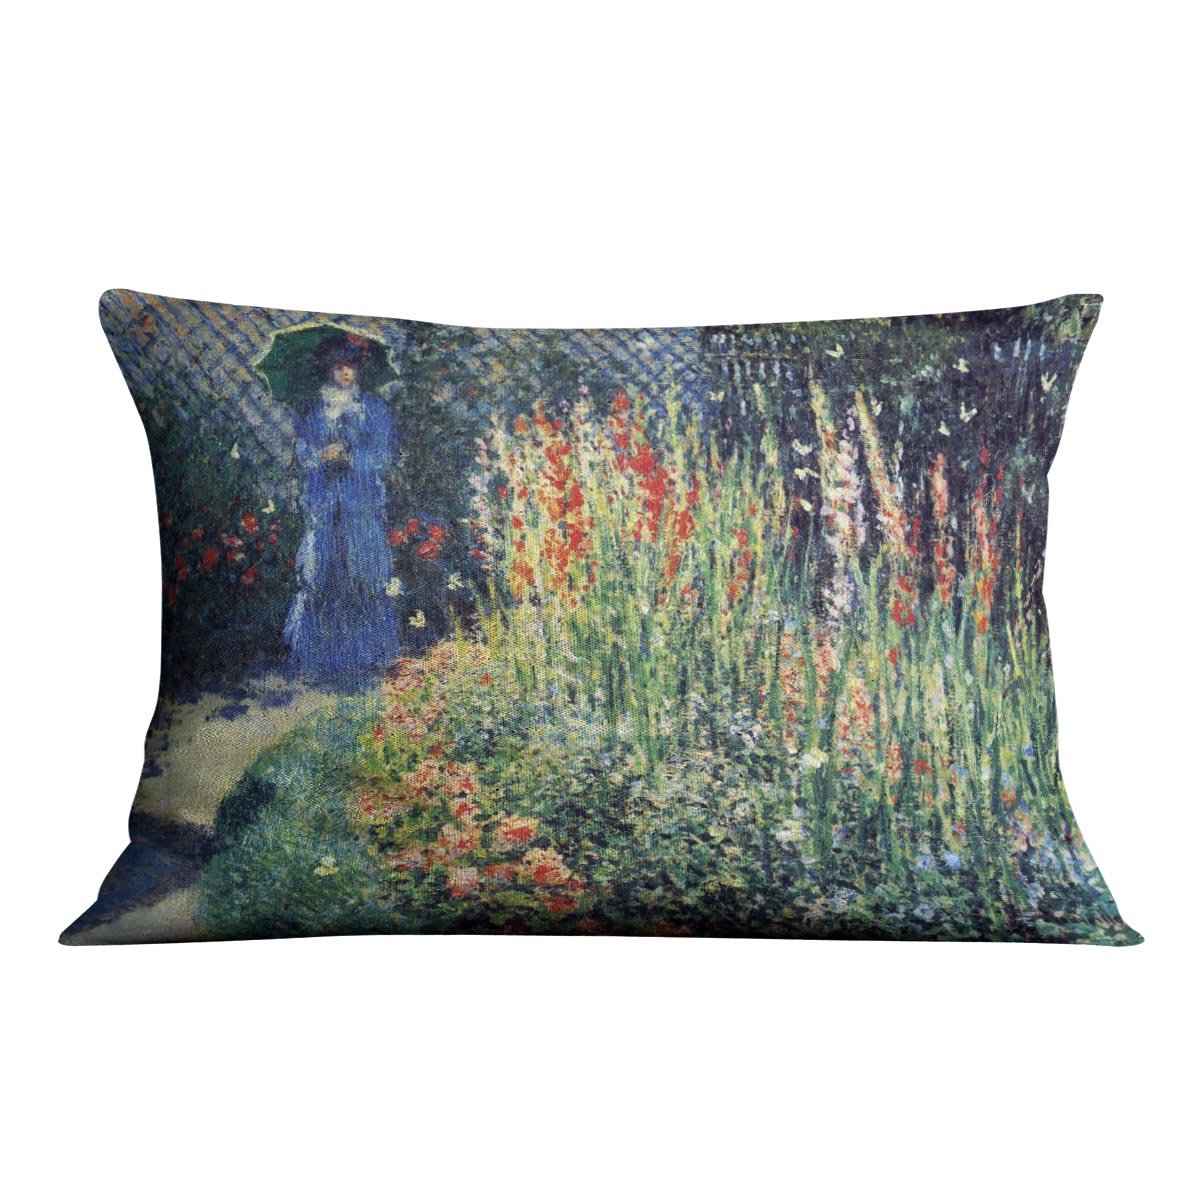 Gladiolas by Monet Throw Pillow